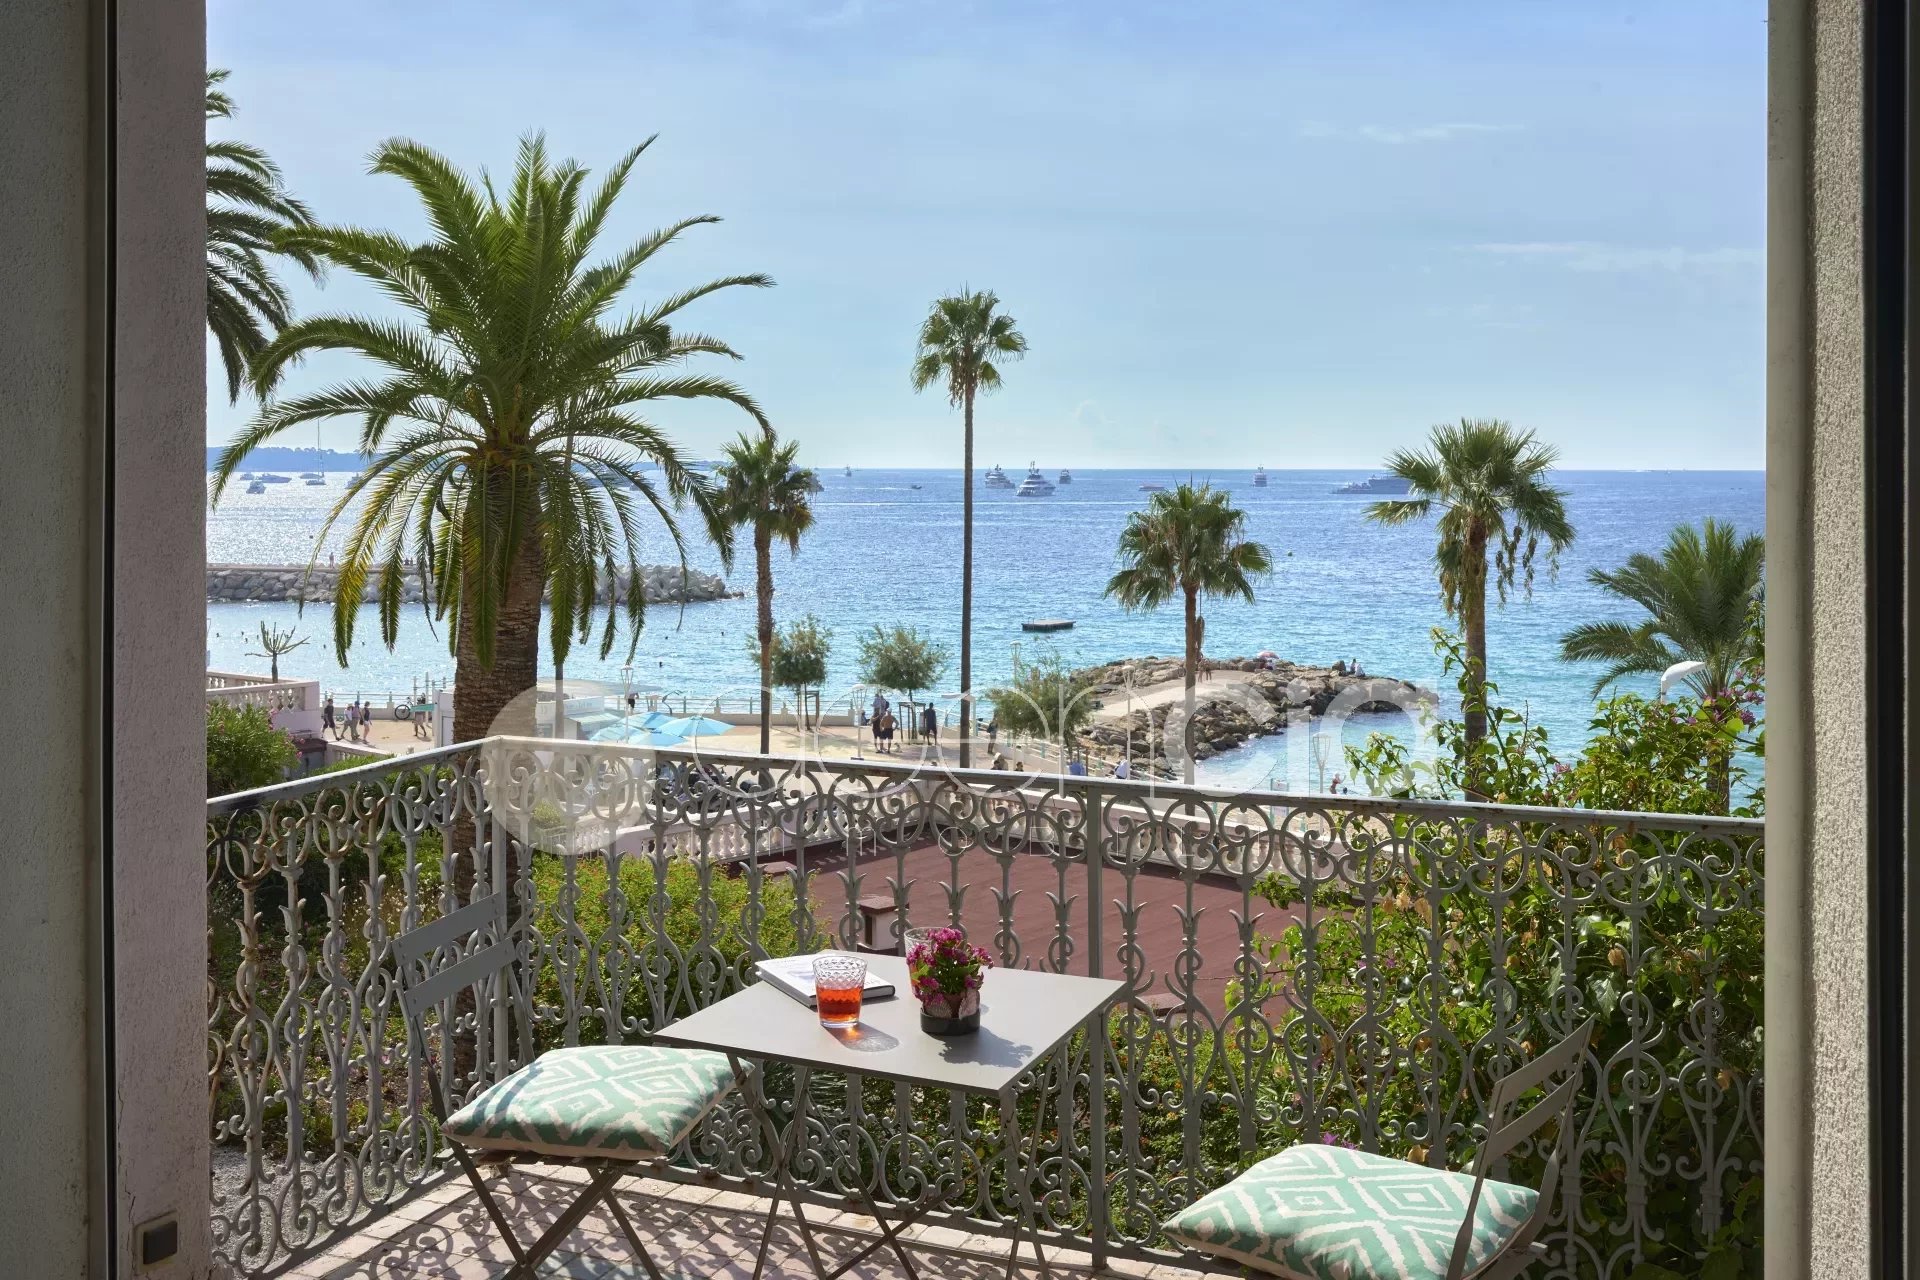 Exceptional Apartment in the Old Port of Cannes - Splendid Sea View, Beaches and Downtown at Your Feet